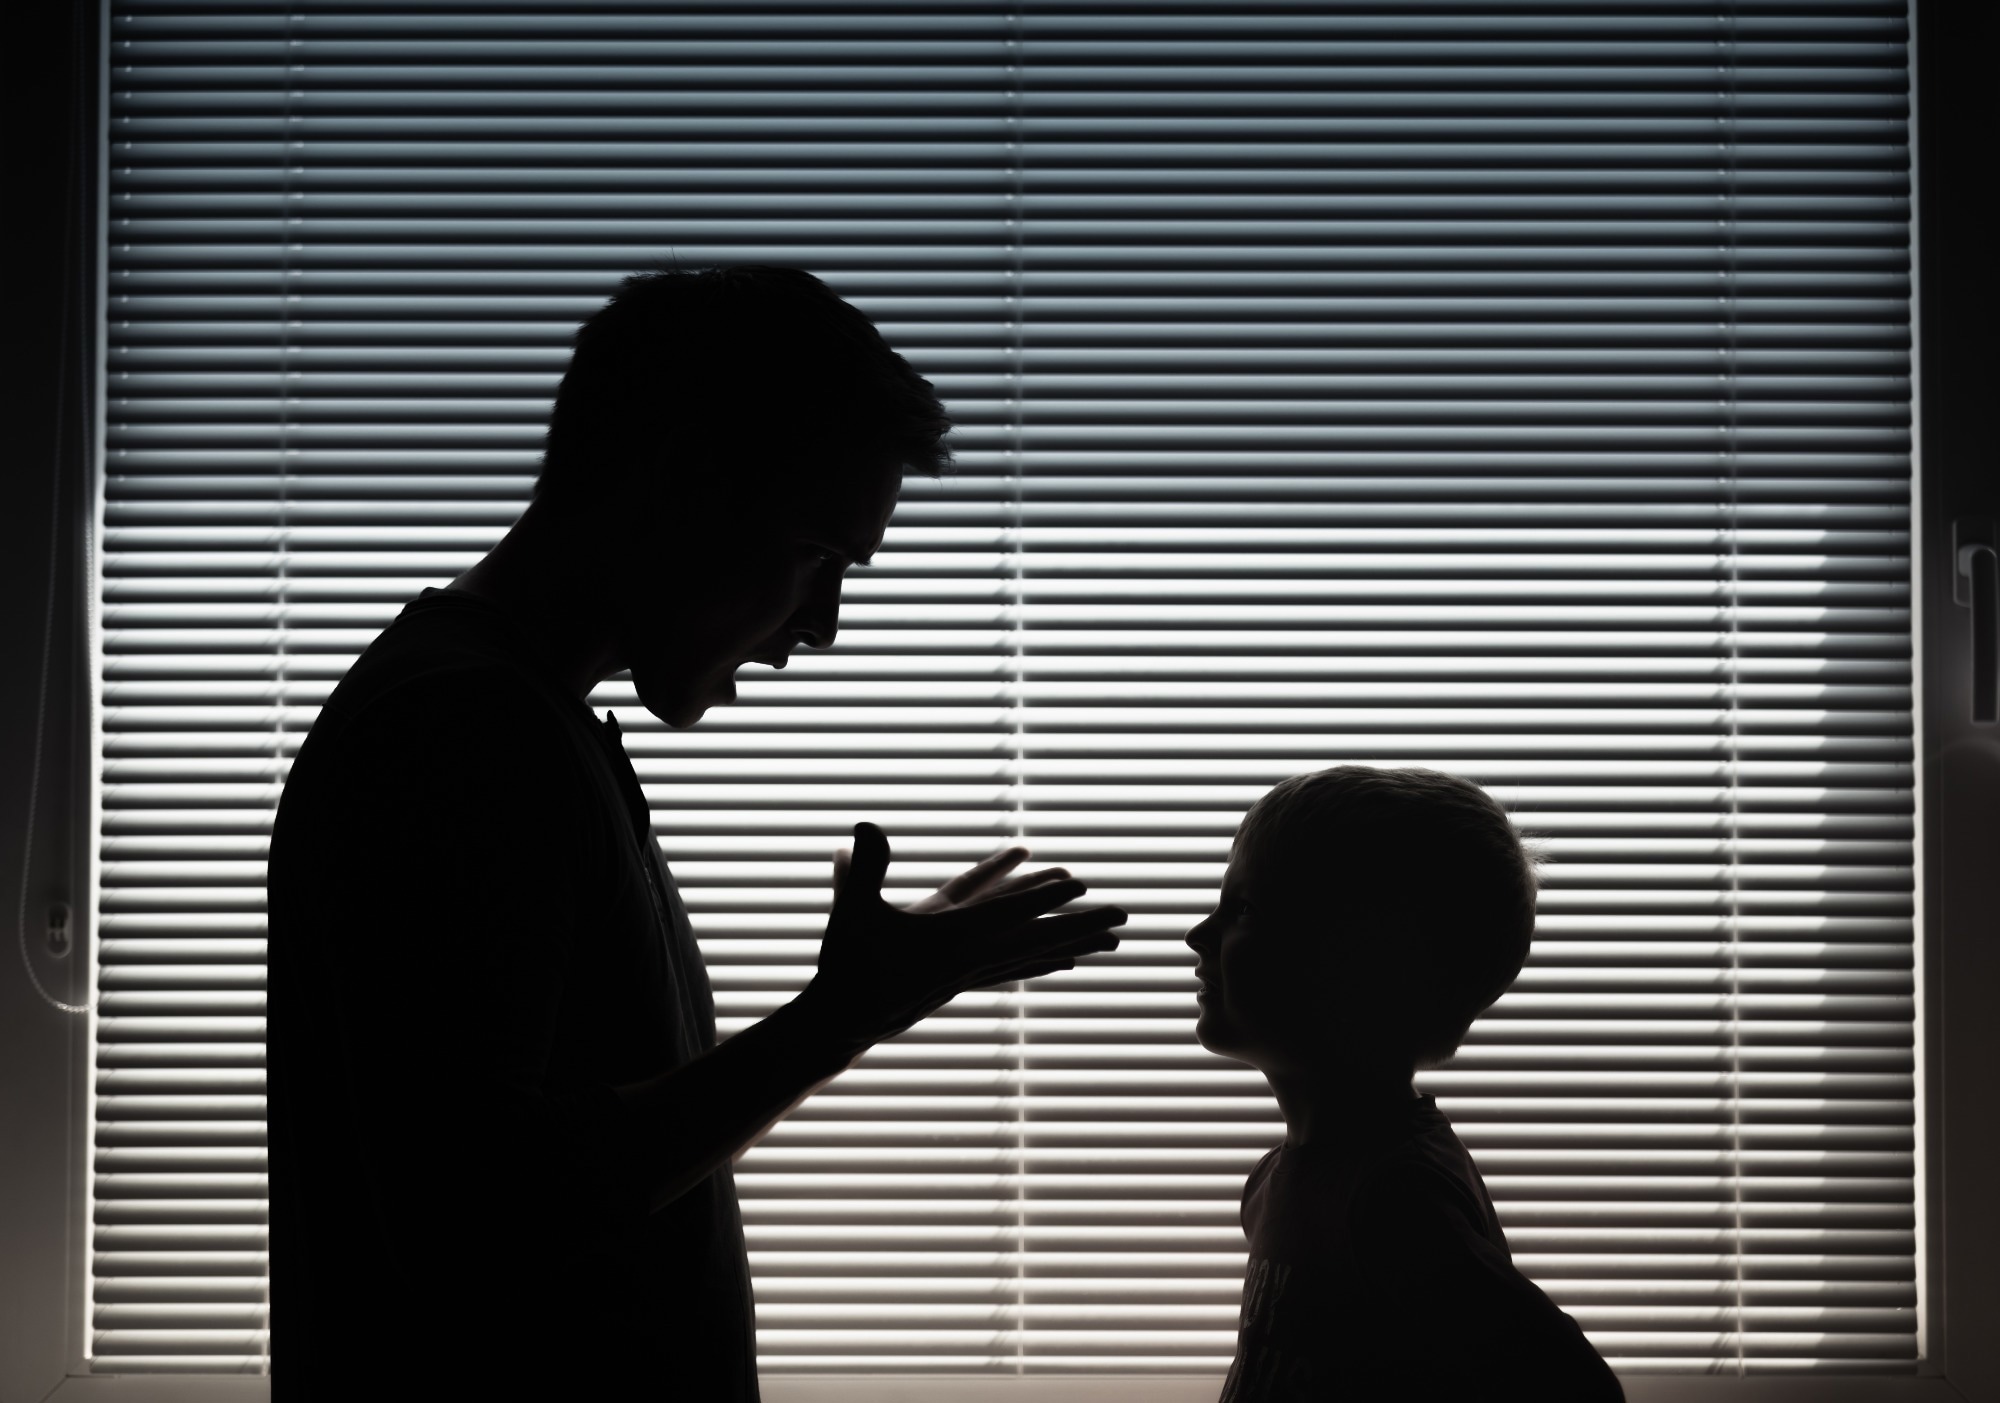 Study: Childhood verbal abuse as a child maltreatment subtype: A systematic review of the current evidence. Image Credit: KieferPix / Shutterstock.com